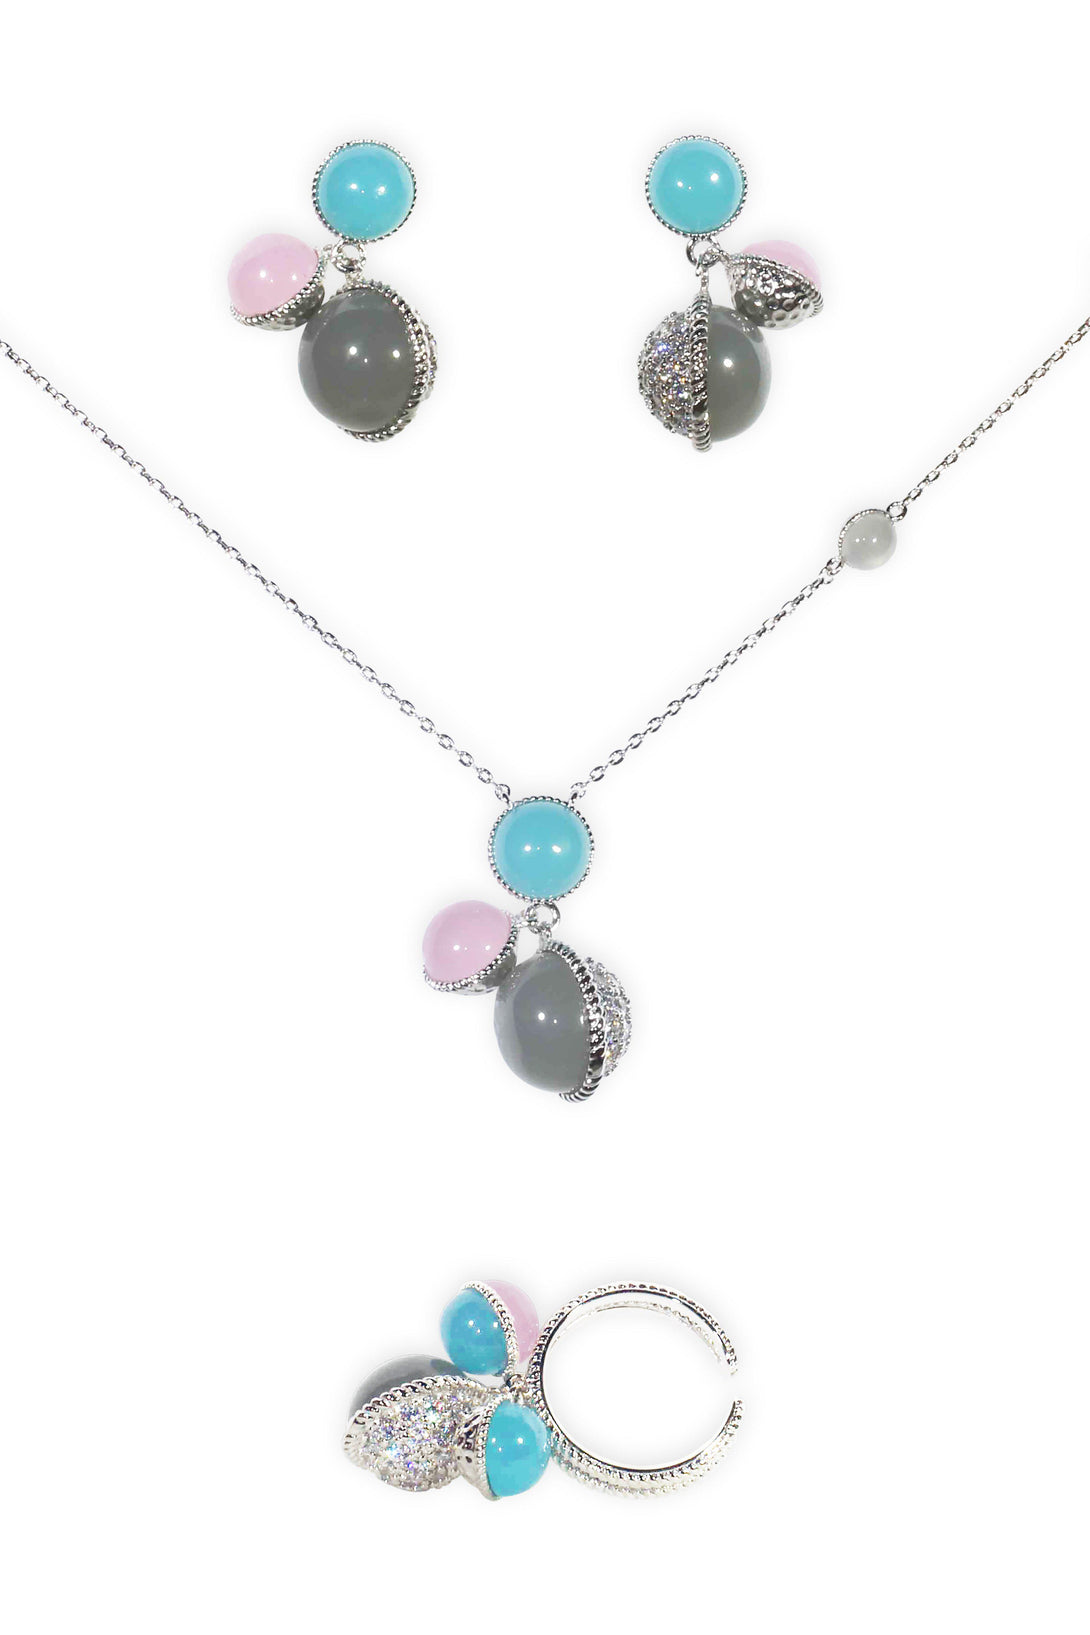 Fun Set Pink, Tiffany Blue and Black Pearl Studs in Silver Plating (Earrings, Necklace, Ring)